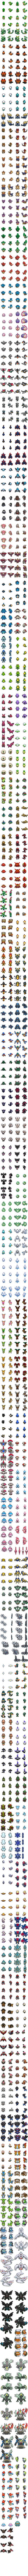 all_gen_5_overwolrd_sprites__ripped__by_phyromatical_d7e706f.png